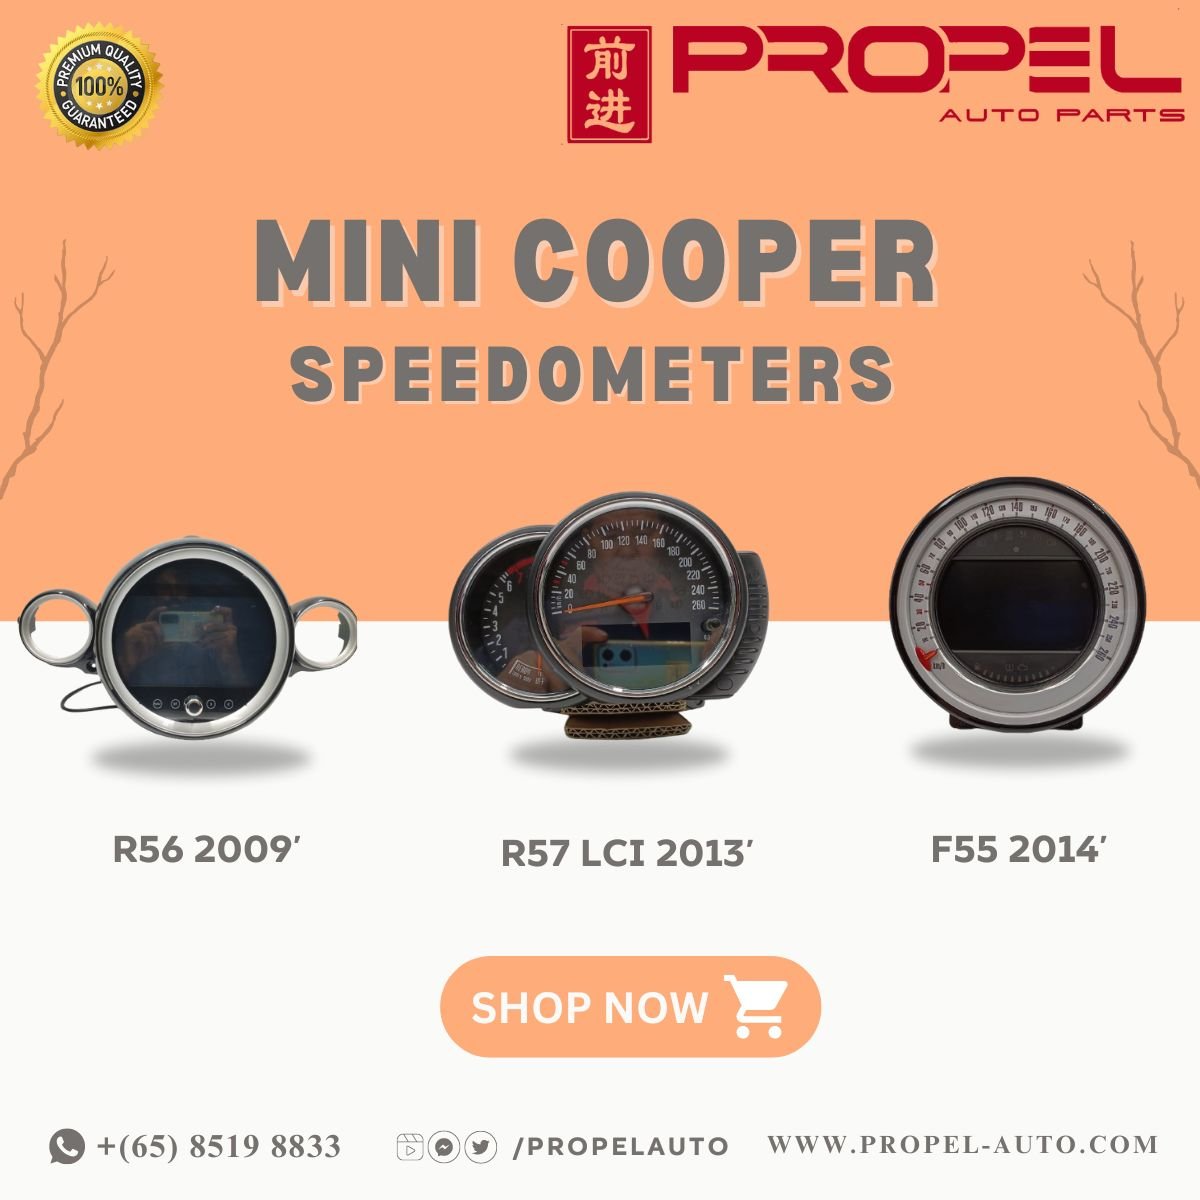 Mini Cooper Speedometer / Cluster Unit available #ForSale 

Ping us & Grab Meter for your car model🤗👇🚗

#MiniCooper #R56 #R57 #F55 #Speedometer #Displayunit #InstumentCluster #SGcars #UsedSpares #Originalitems #GuranteedParts #PropelAutoParts #MiniParts #Interiors #Ping #Grab